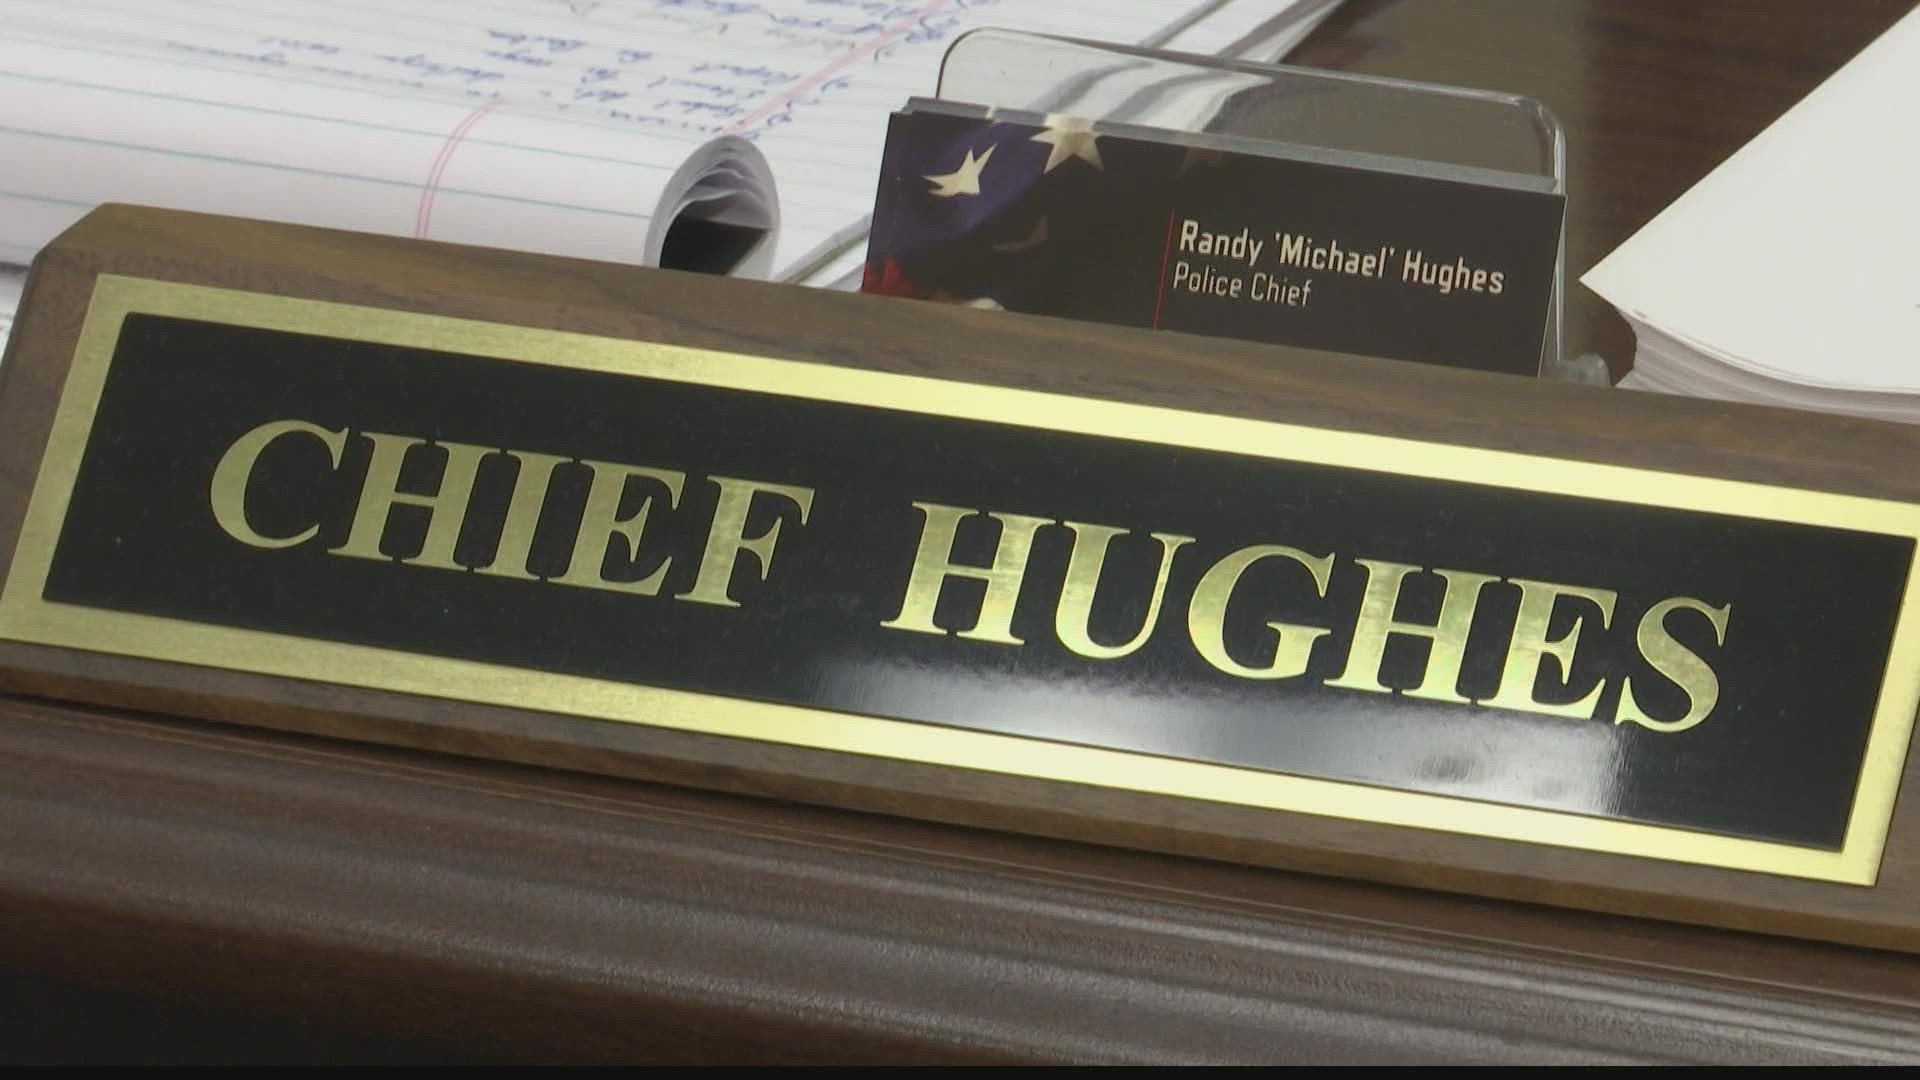 Trinity Police Chief Michael Hughes has served as a patrol officer for nine years, including one year as police chief.